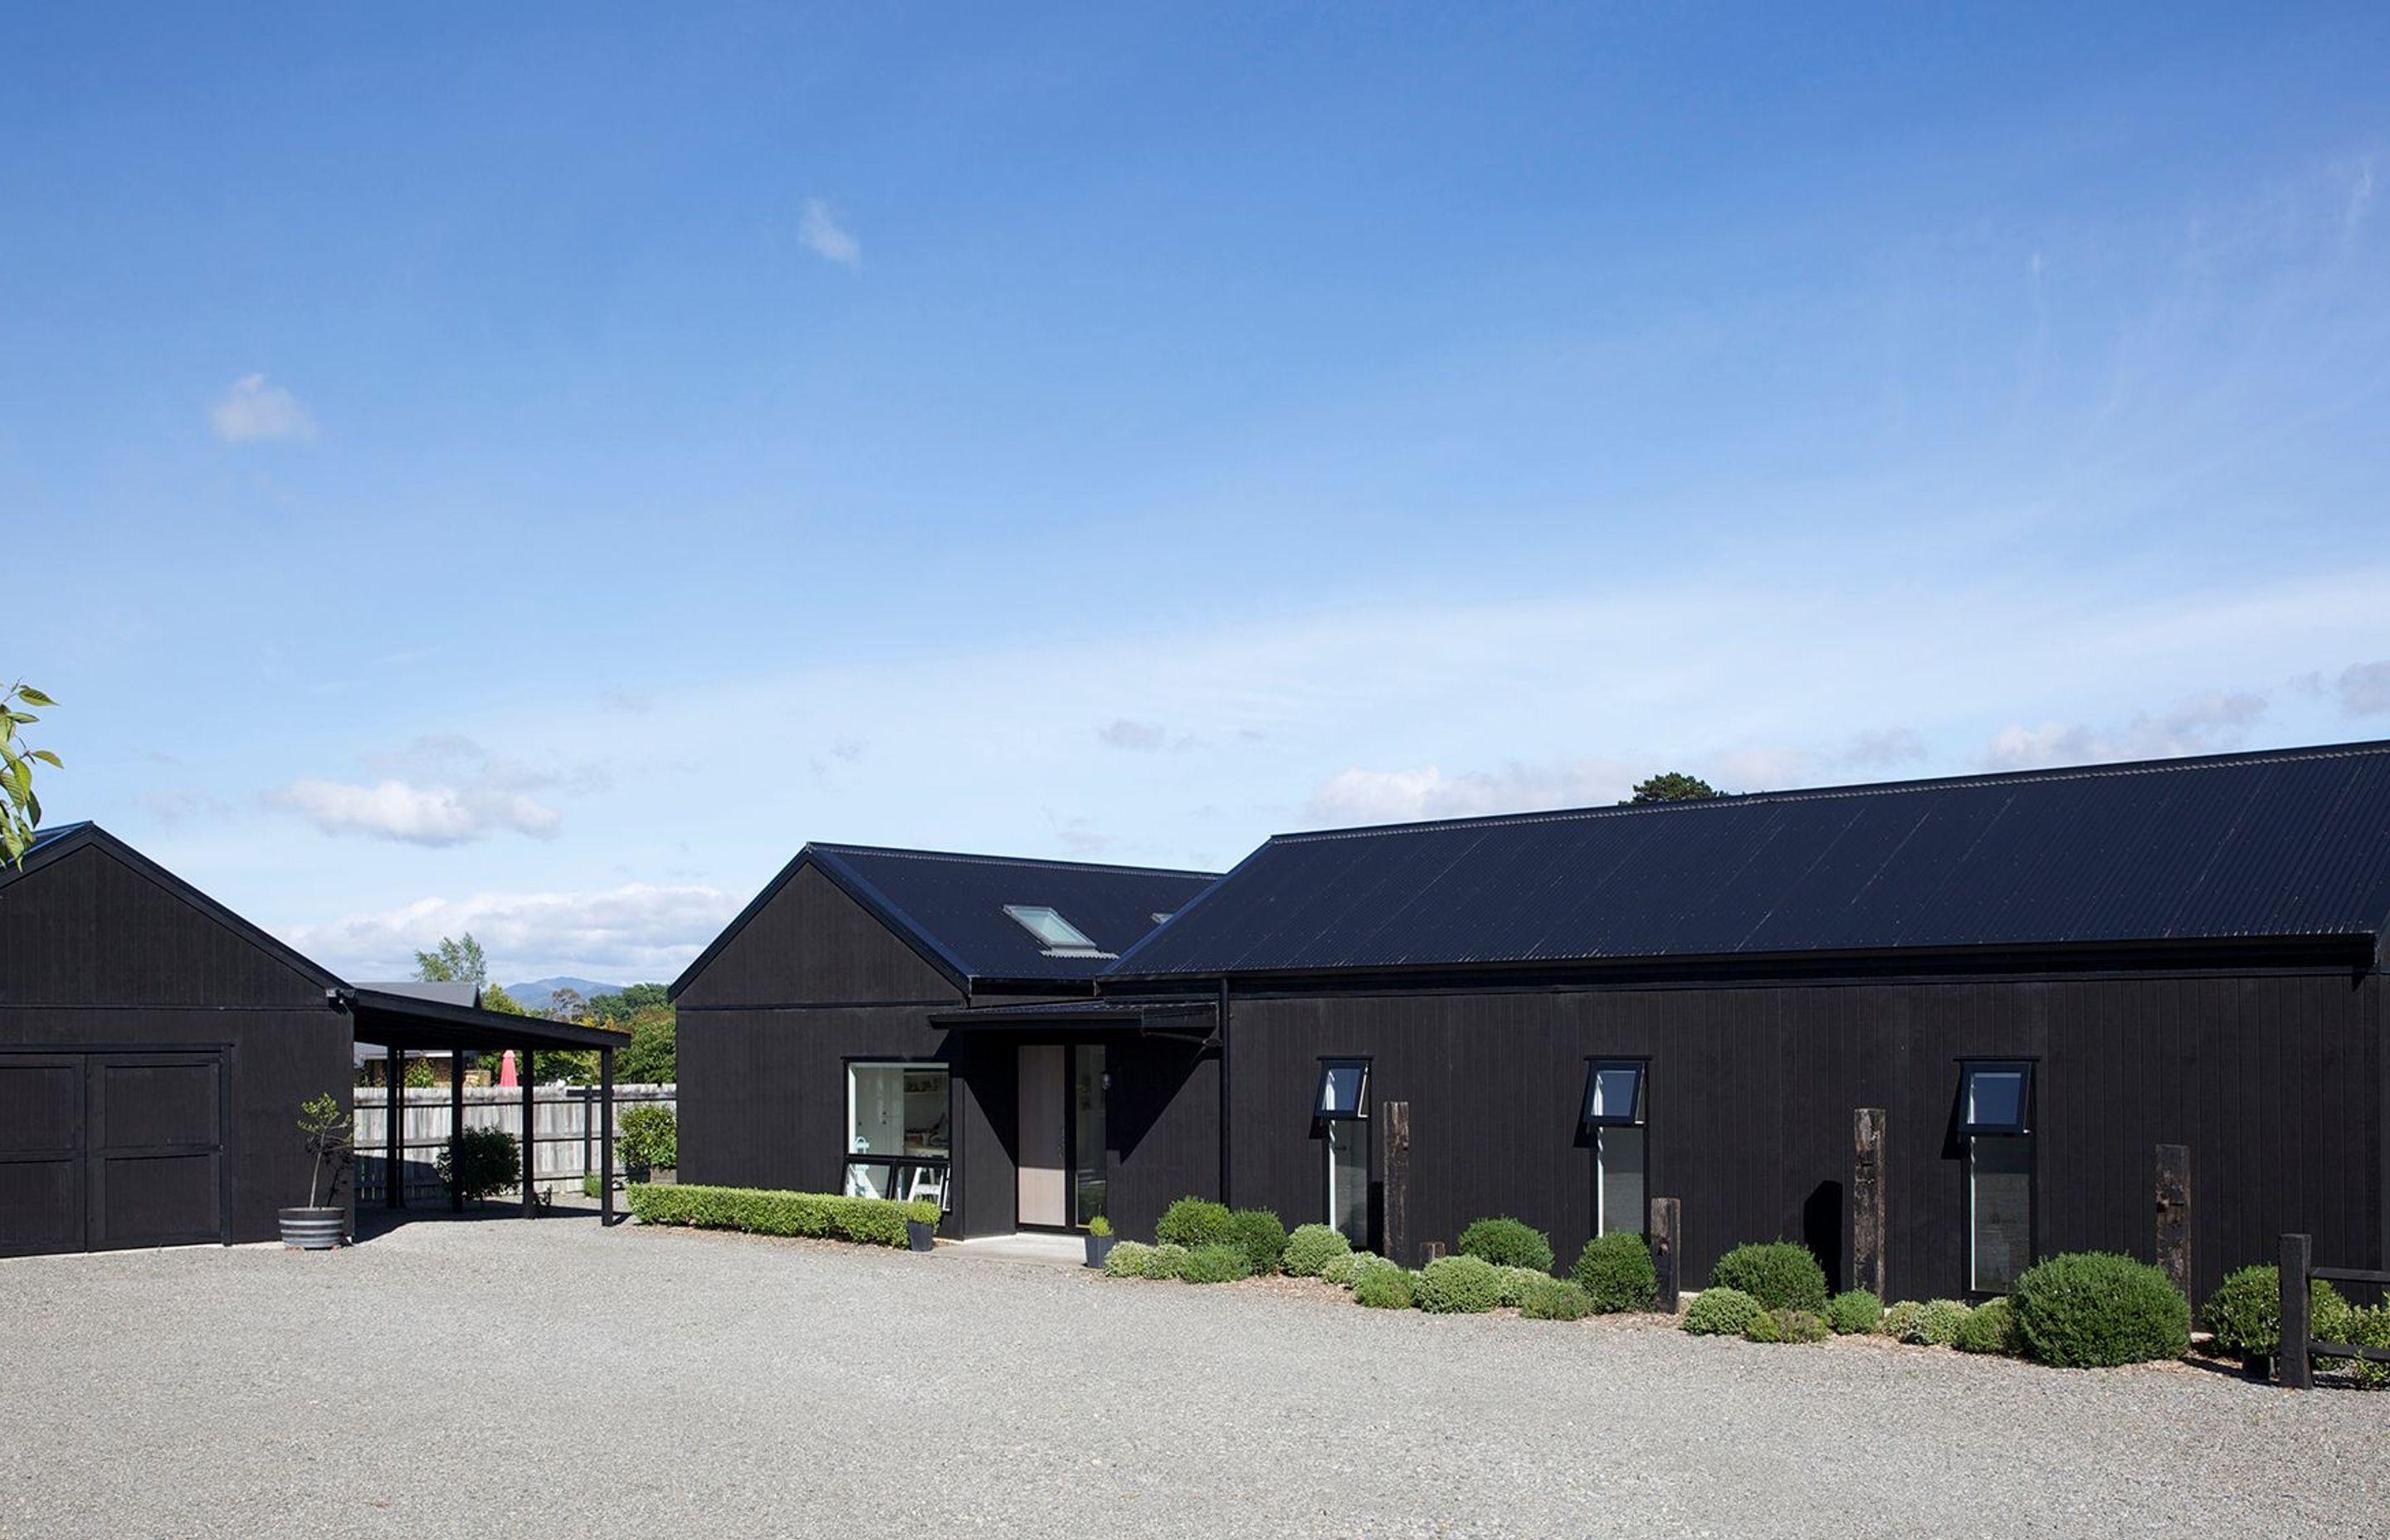 Located within a beautiful rural setting on the edge of Carterton, Eco Architecture Wairarapa was made more affordable to build by being constructed by the owners.